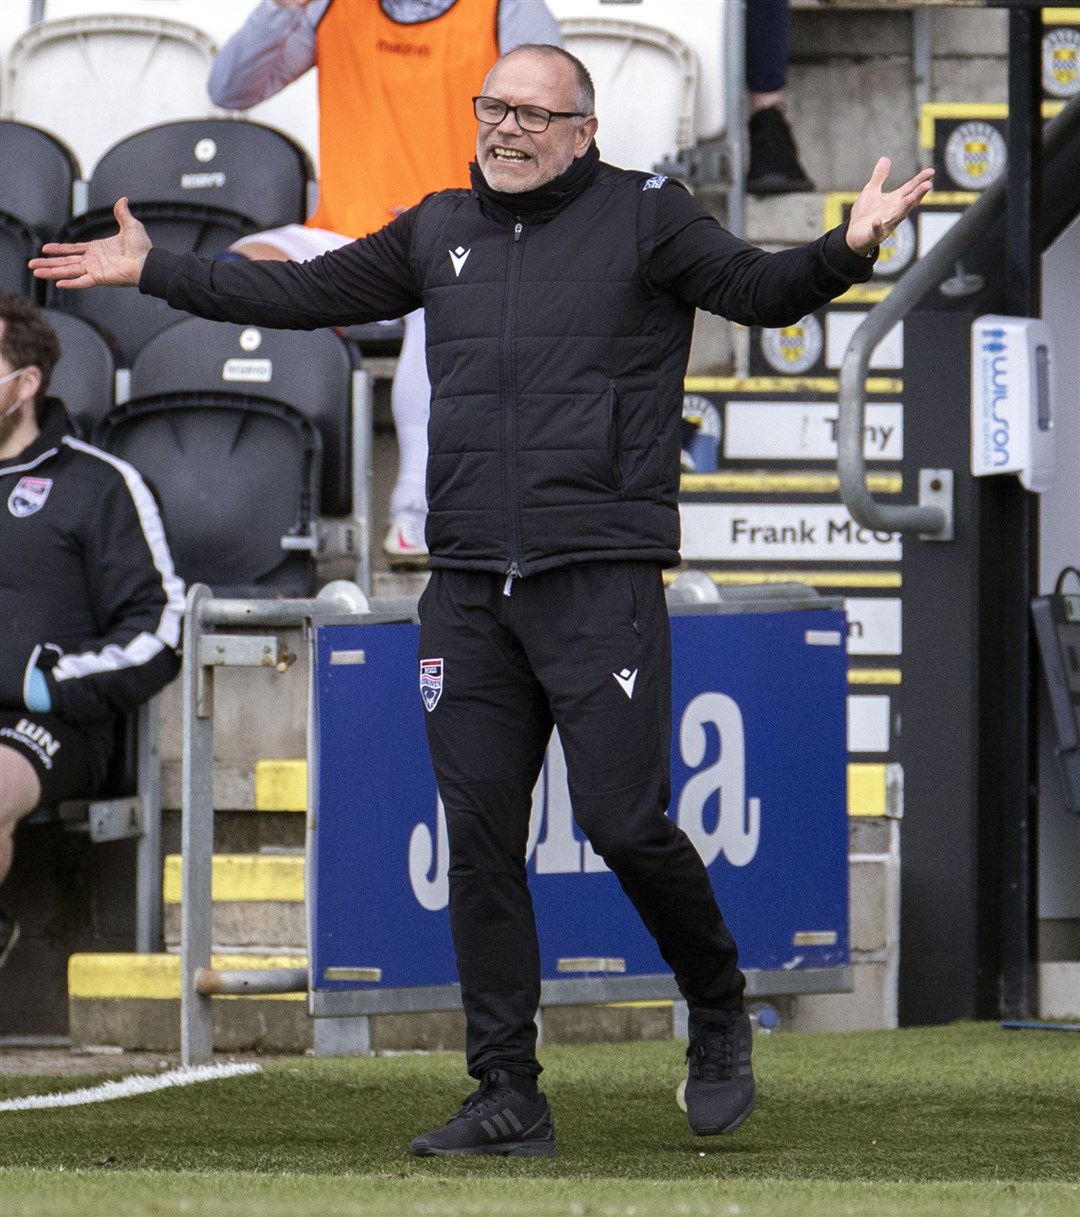 Picture - Ken Macpherson, Inverness. St.Mirren(1) v Ross County(0). 27.02.21. Ross County manager John Hughes.